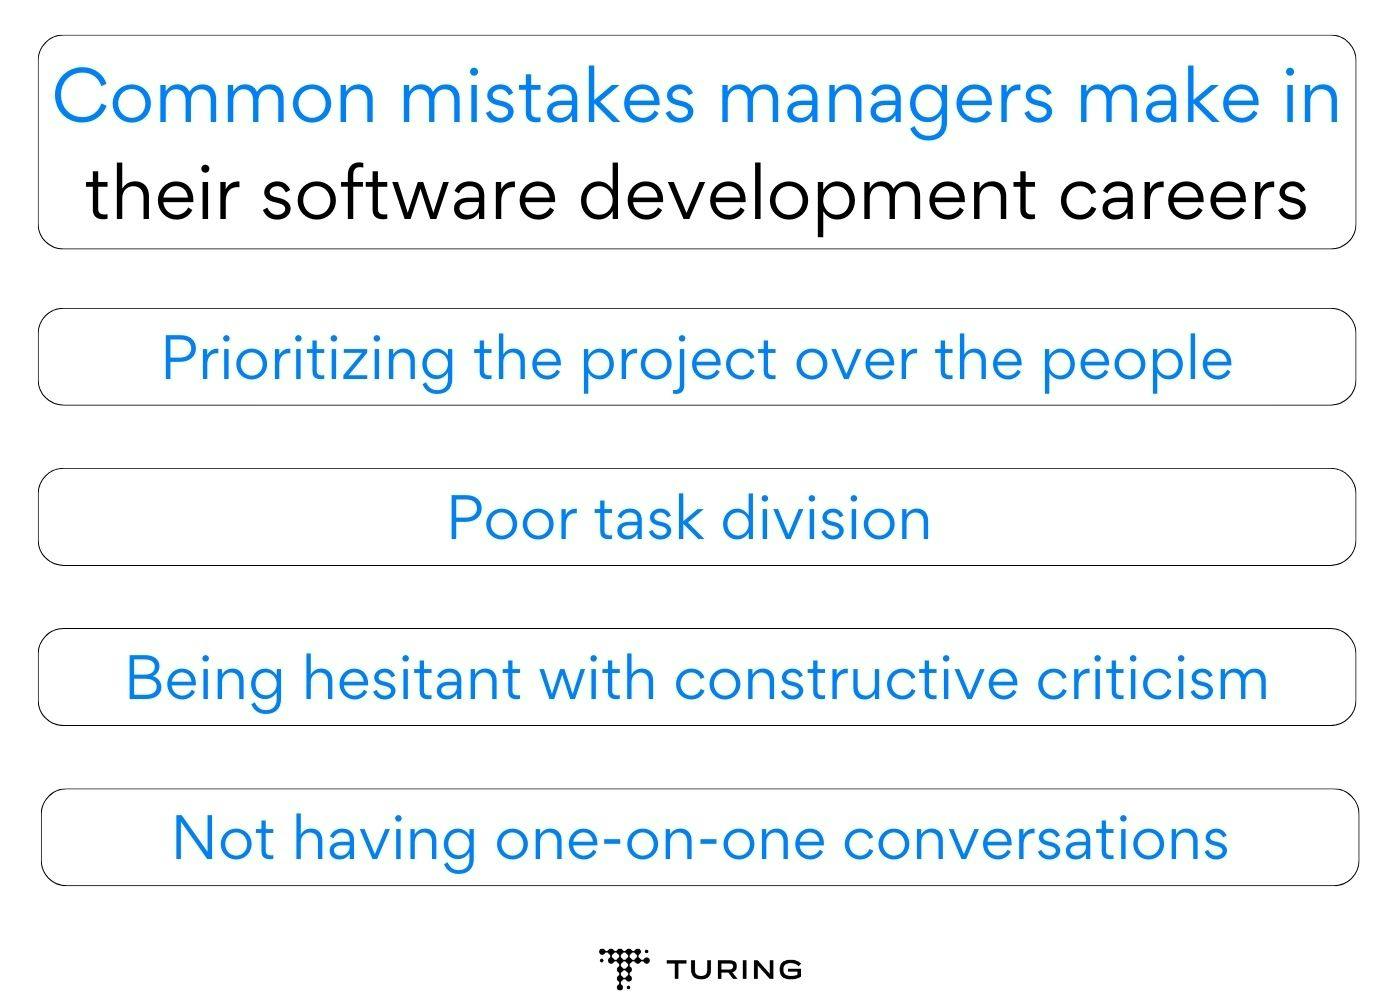 Common mistakes managers make in their software development careers